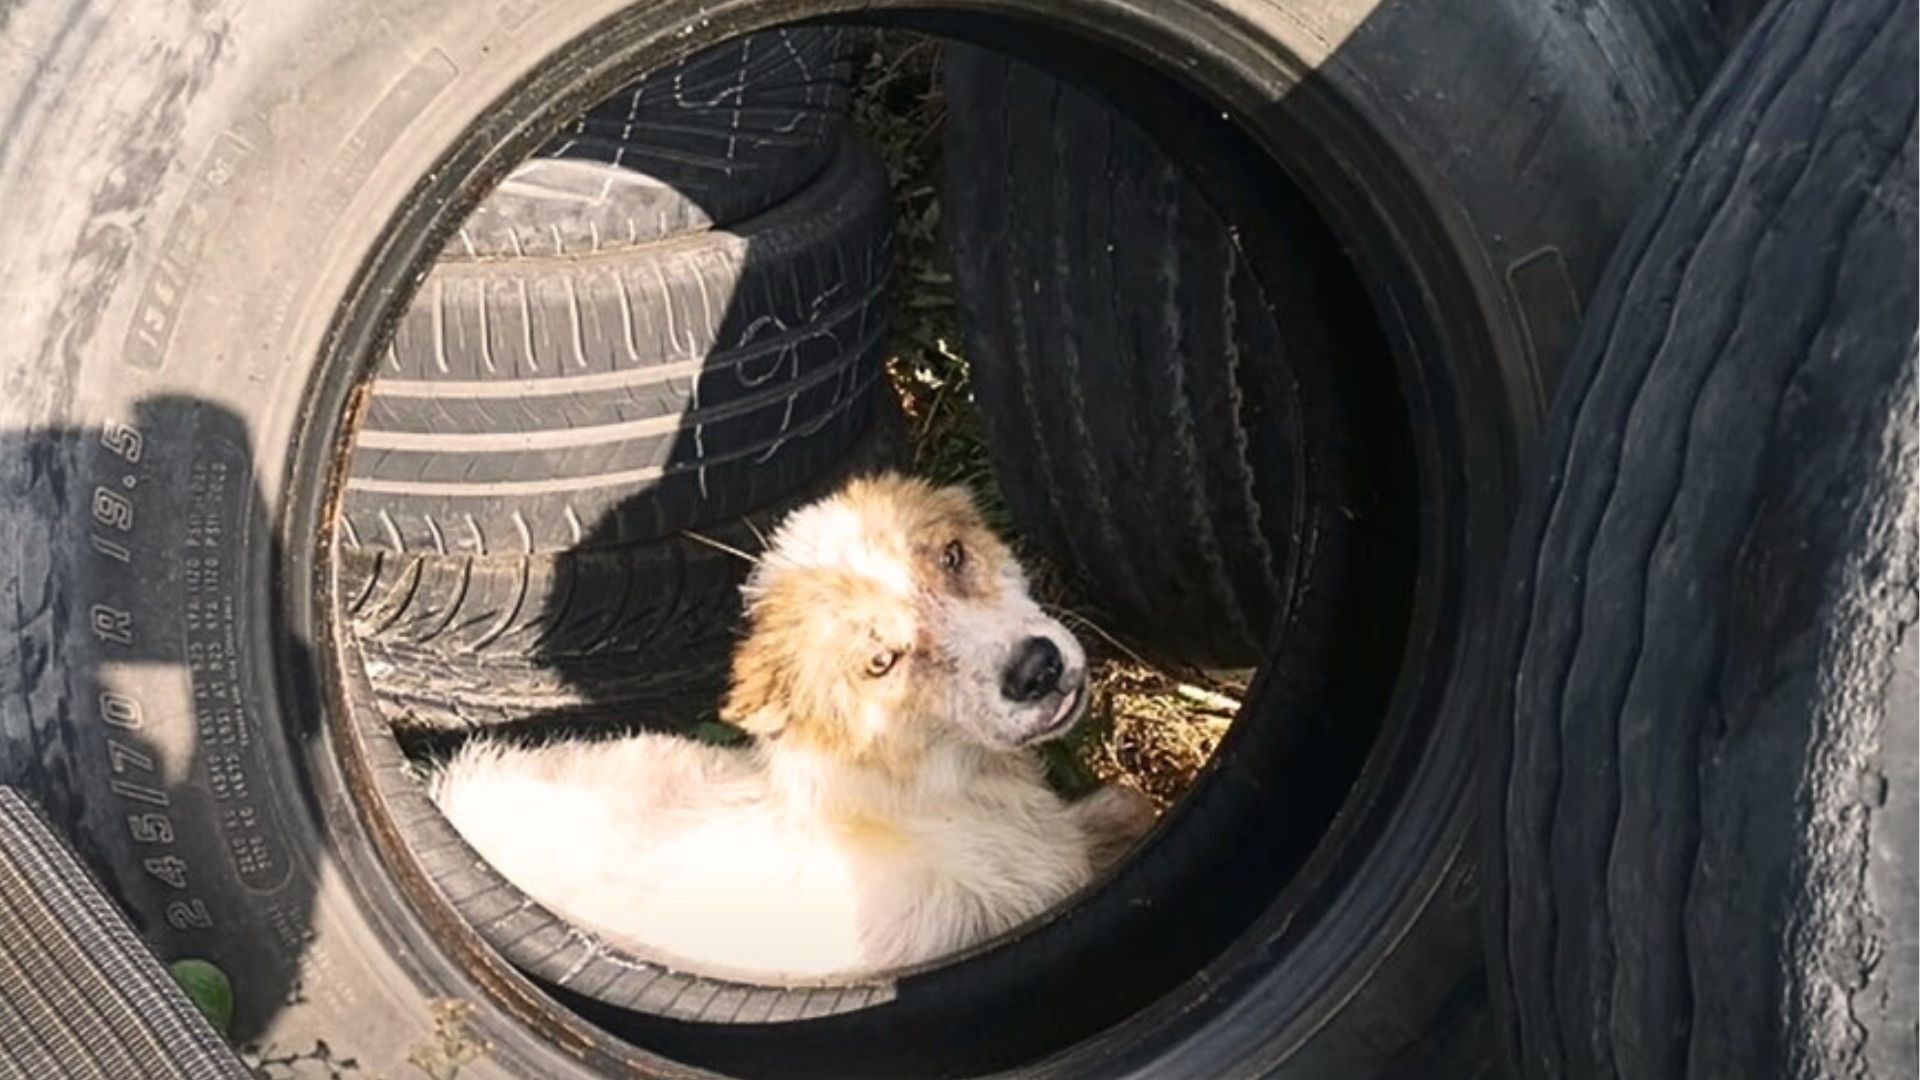 Shocked Gas Station Owner Finds Unexpected Surprise Hidden Between Car Tires